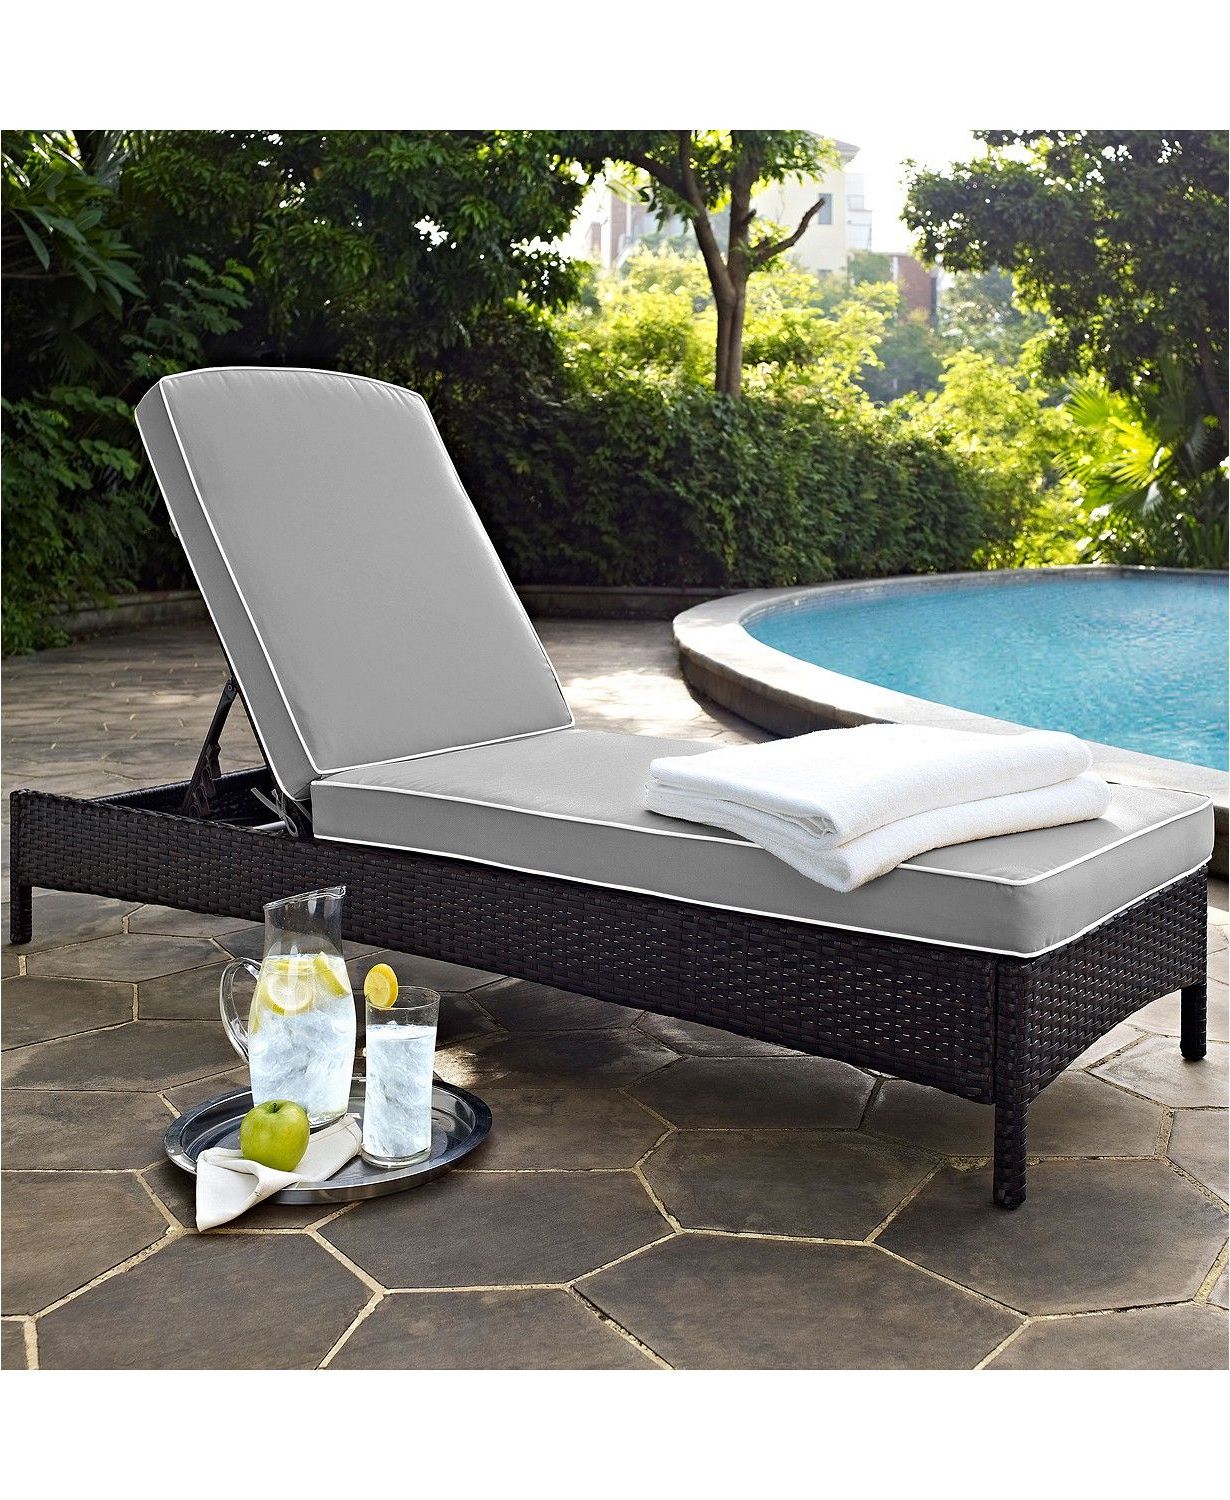 Most Popular Palm Harbor Outdoor Wicker Chaise Lounge With Cushions With Jamaica Outdoor Wicker Chaise Lounges With Cushion (View 16 of 25)